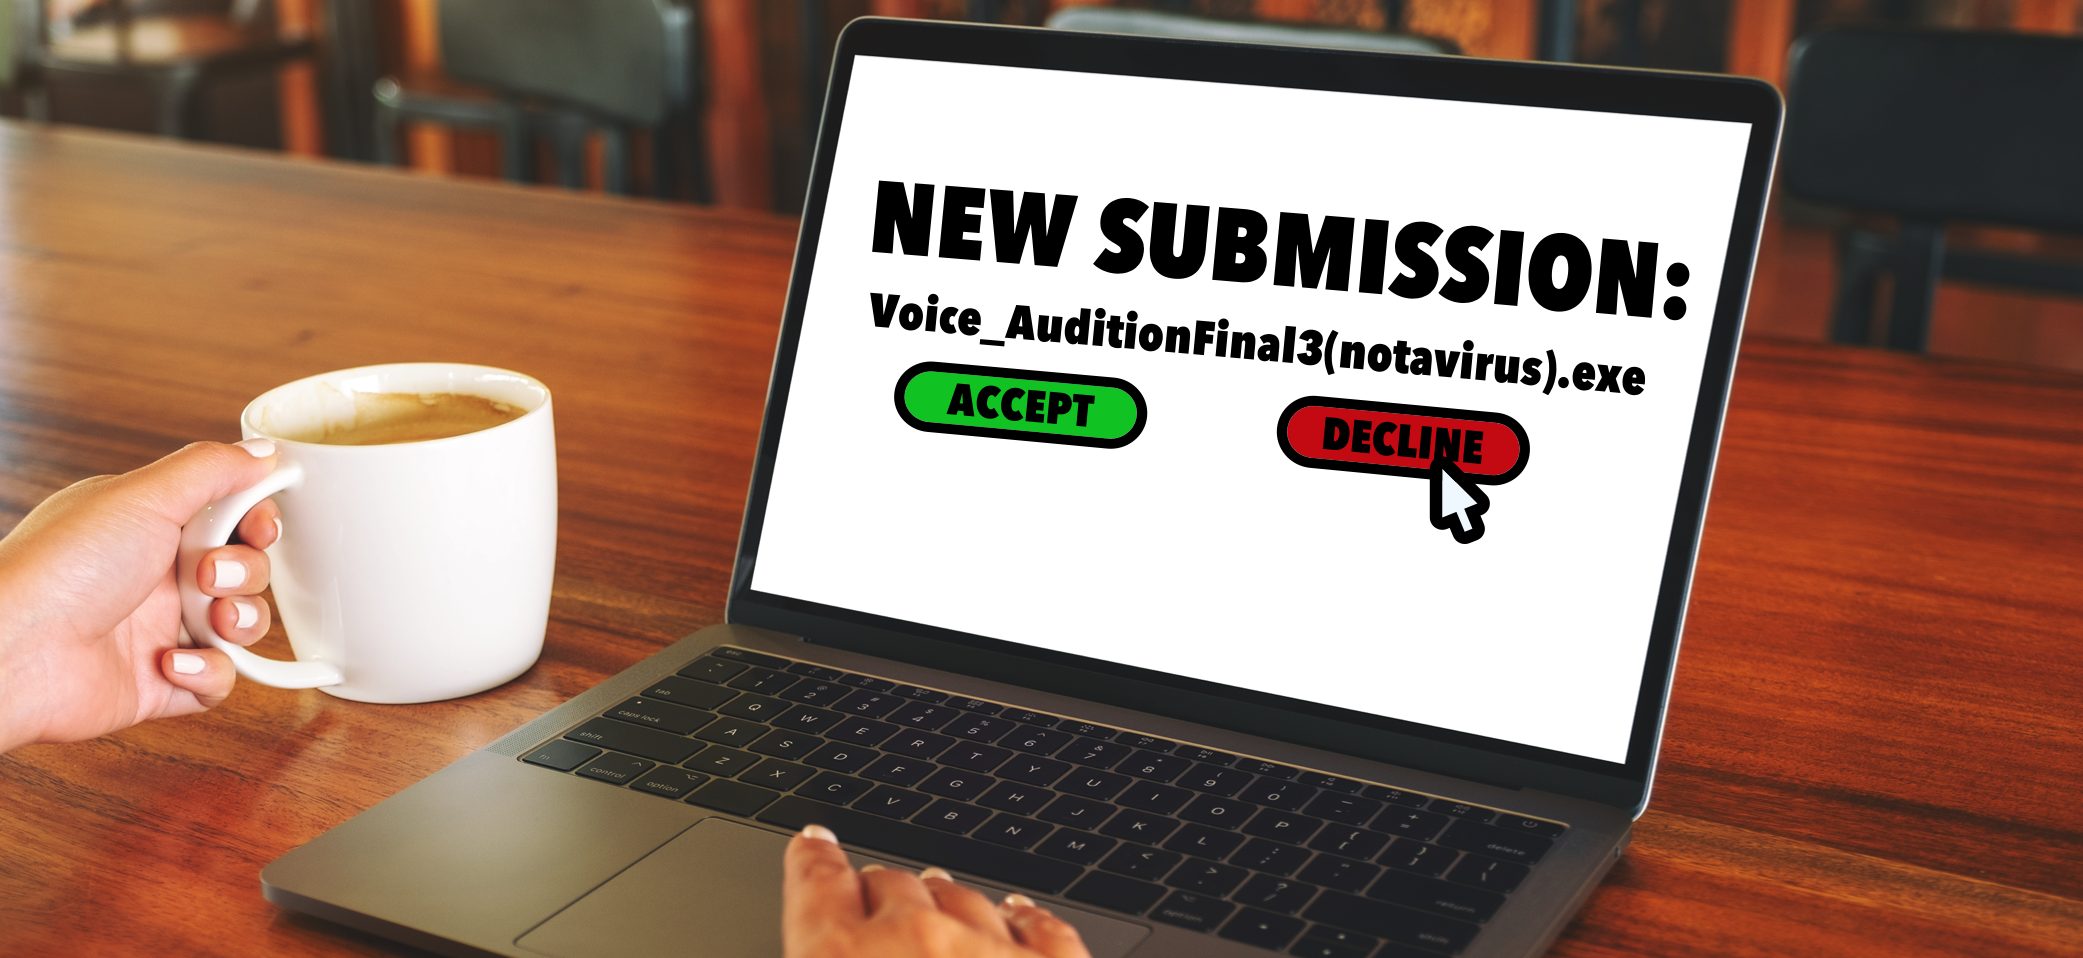 Voice audition submission